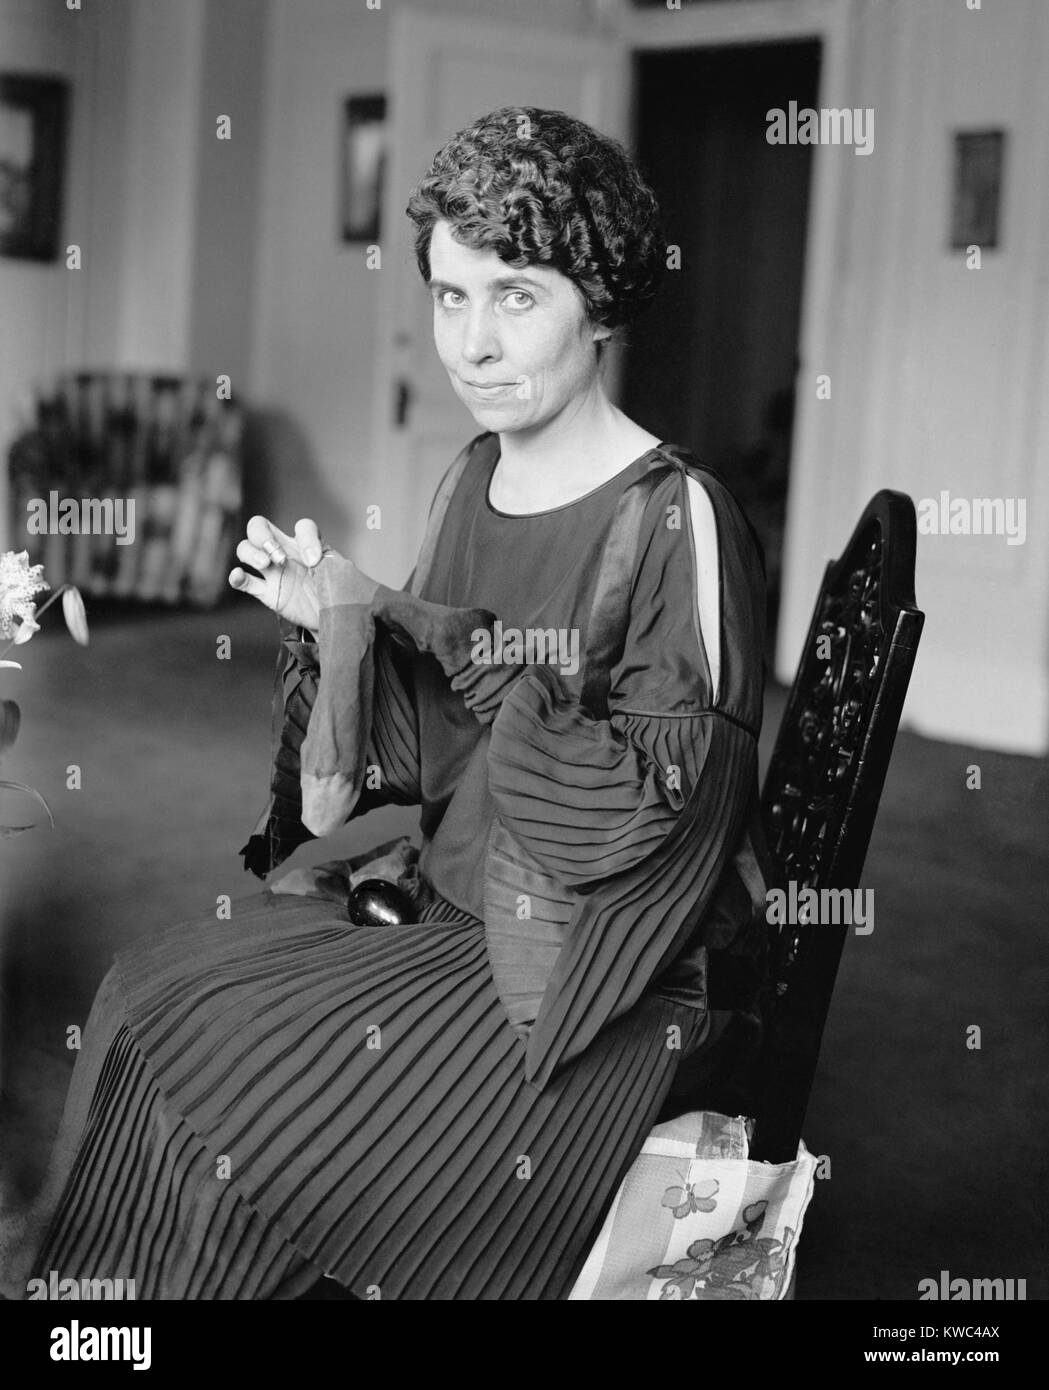 First Lady Grace Coolidge darning socks on August 6, 1923. It was four days after the death of President Warren Harding. Photo was probably taken in the Coolidge's suite at the Willard Hotel. (BSLOC 2015 15 156) Stock Photo